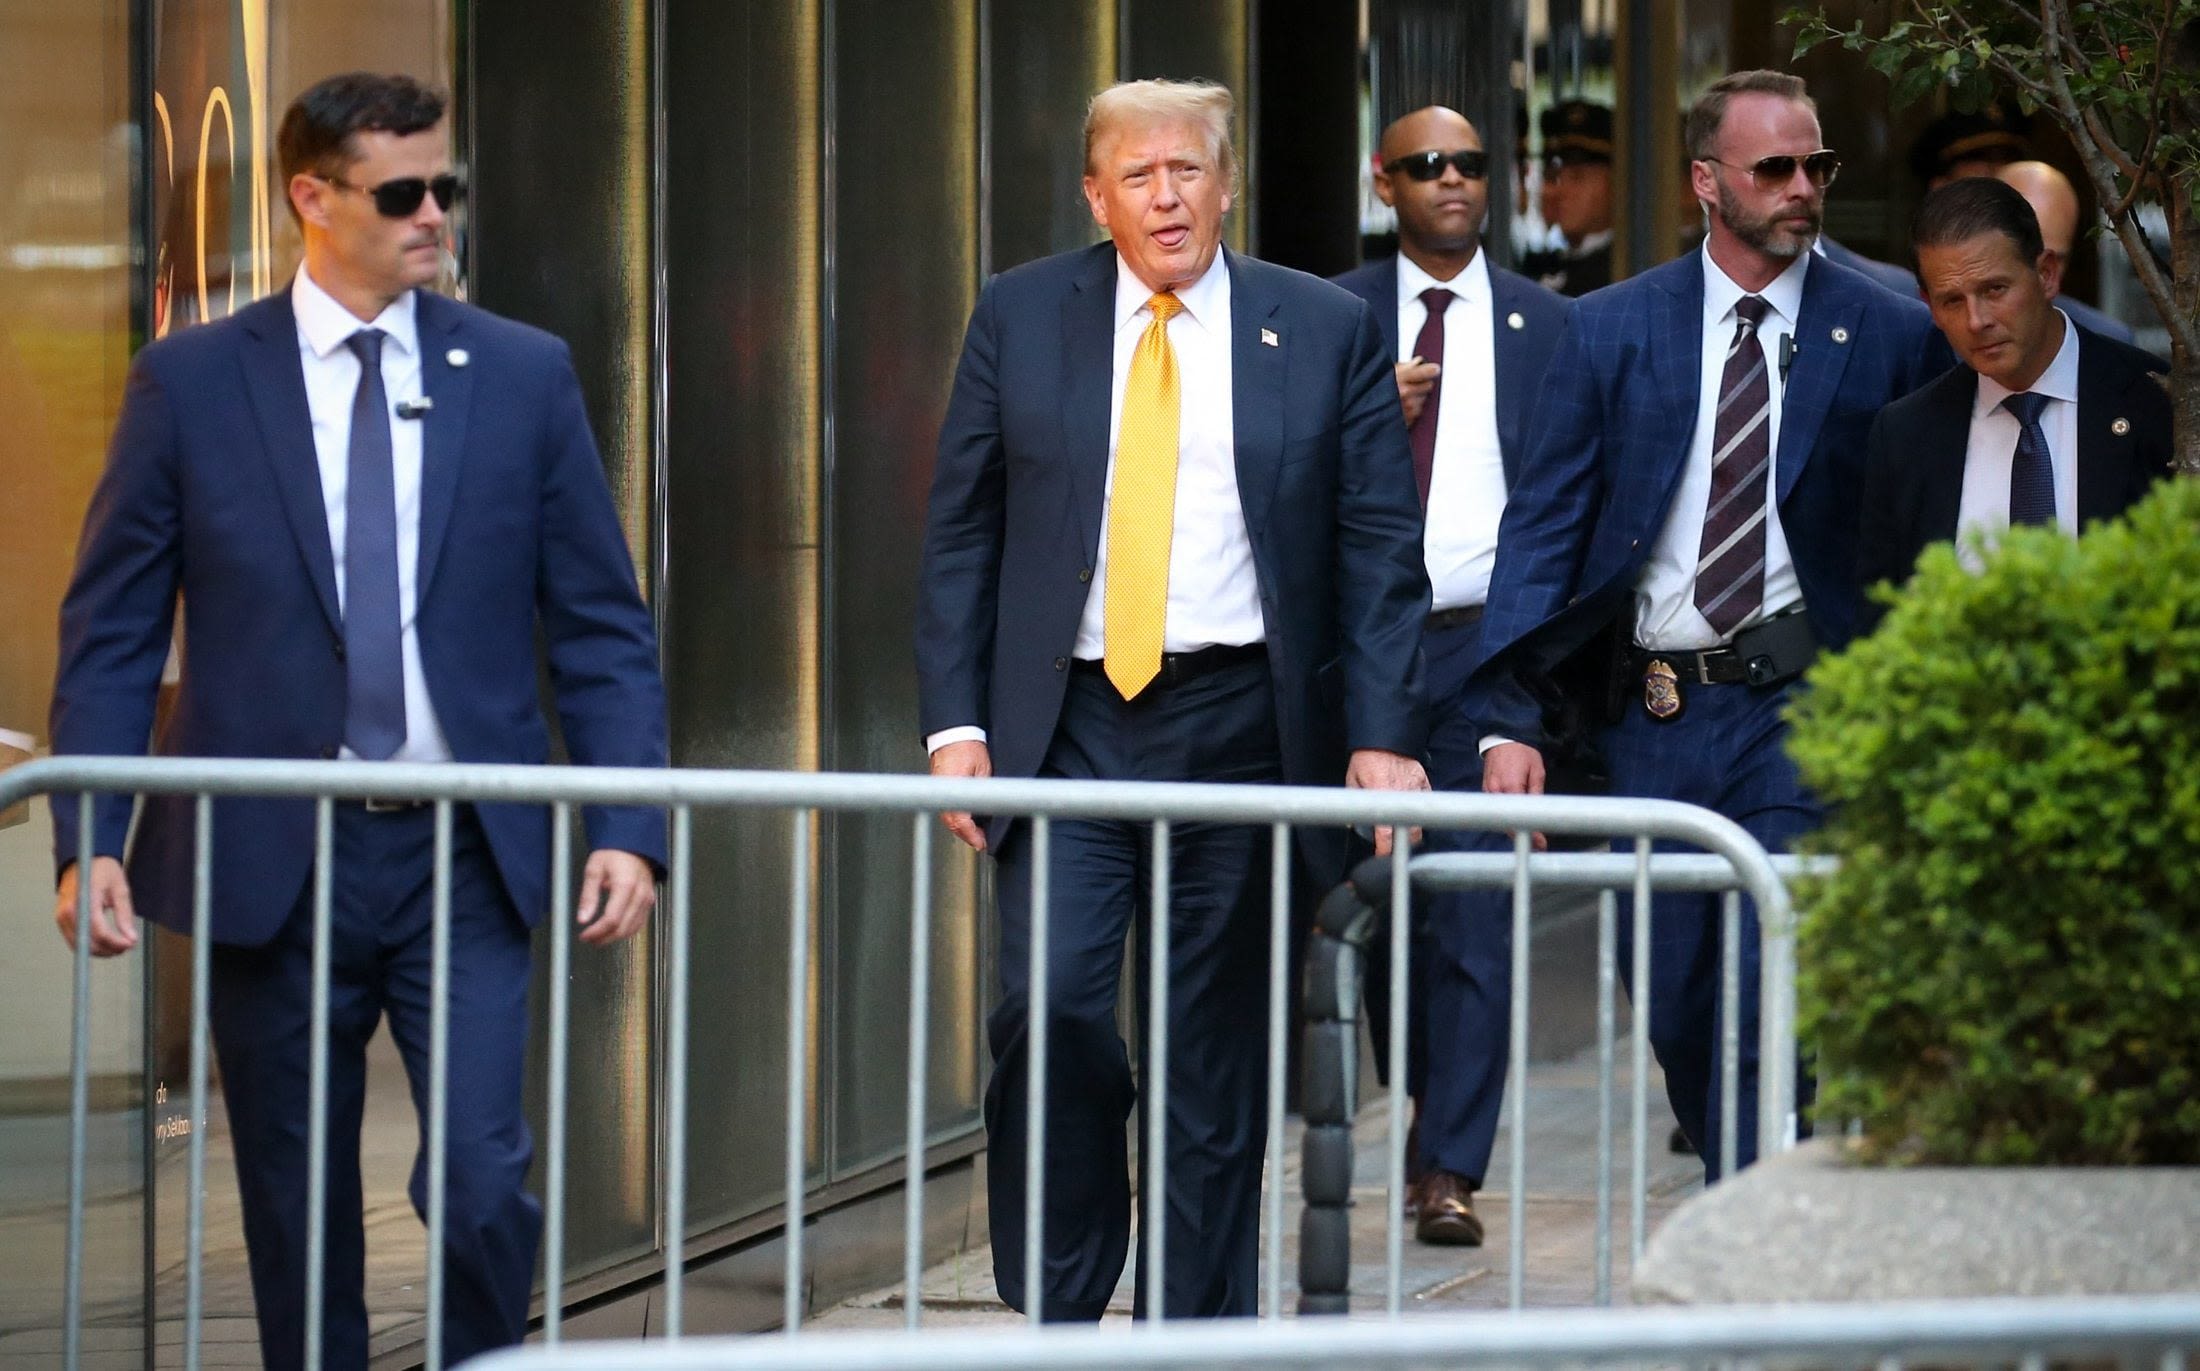 Secret Service preparing agents to protect a jailed Trump